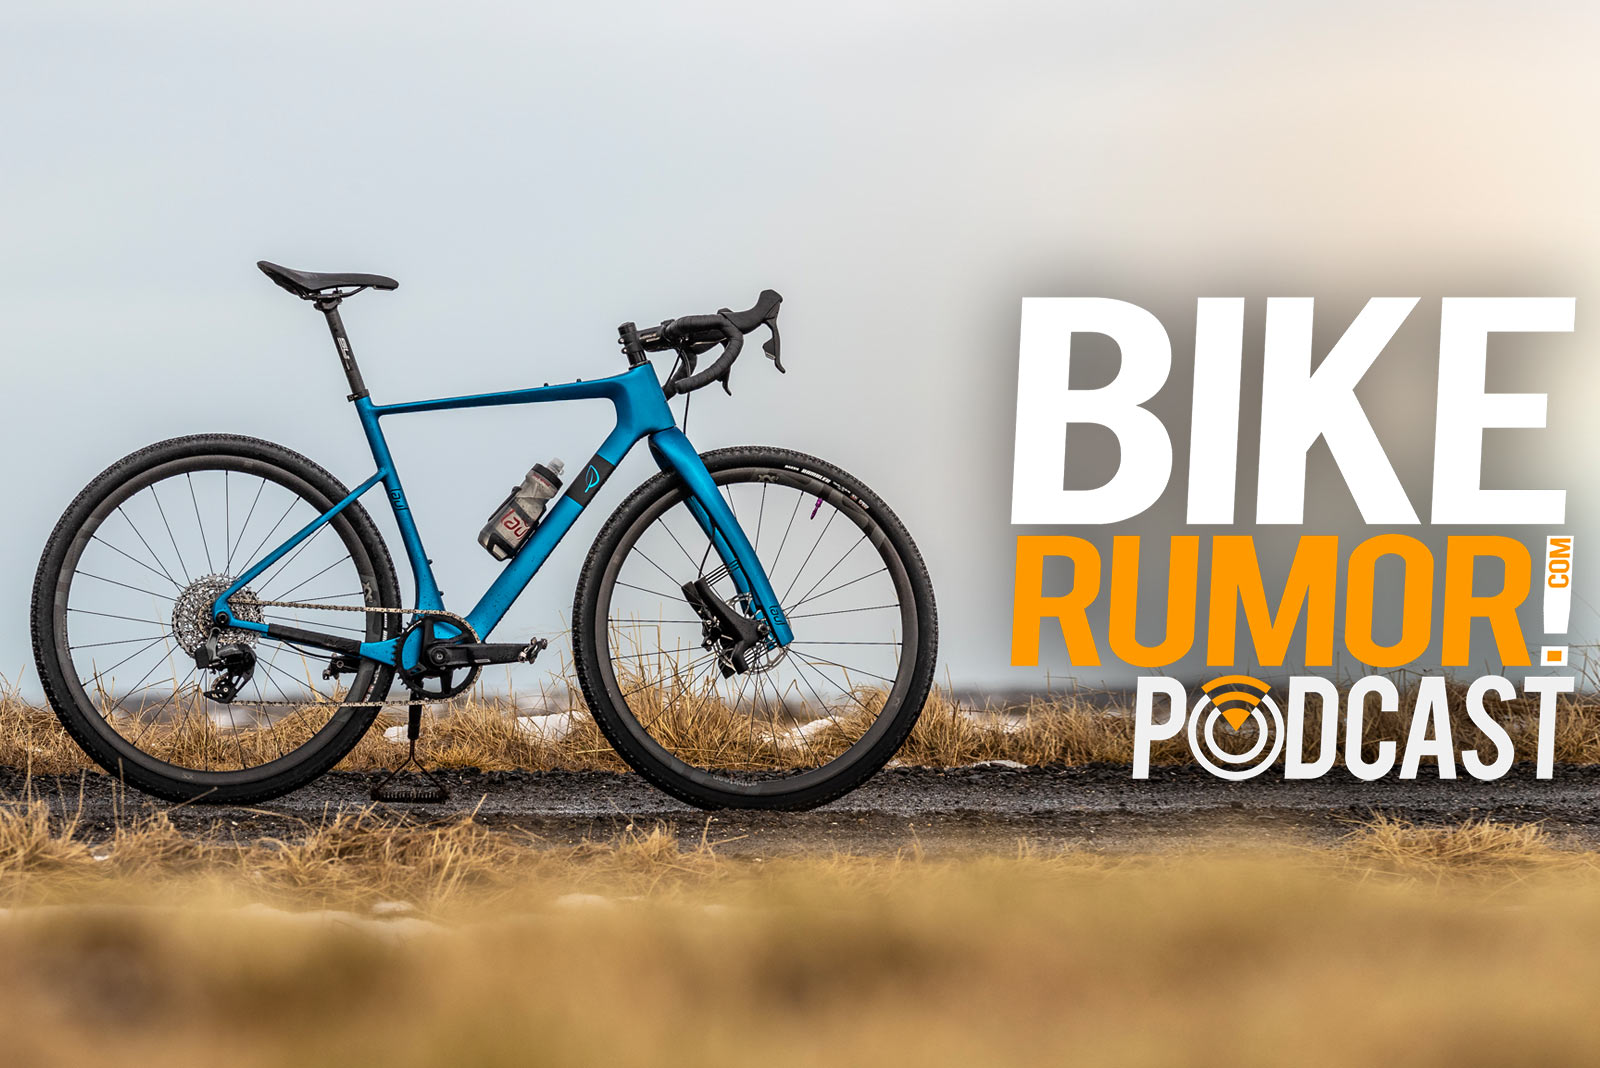 bikerumor podcast feature with lauf cycling about their new seigla gravel race bike